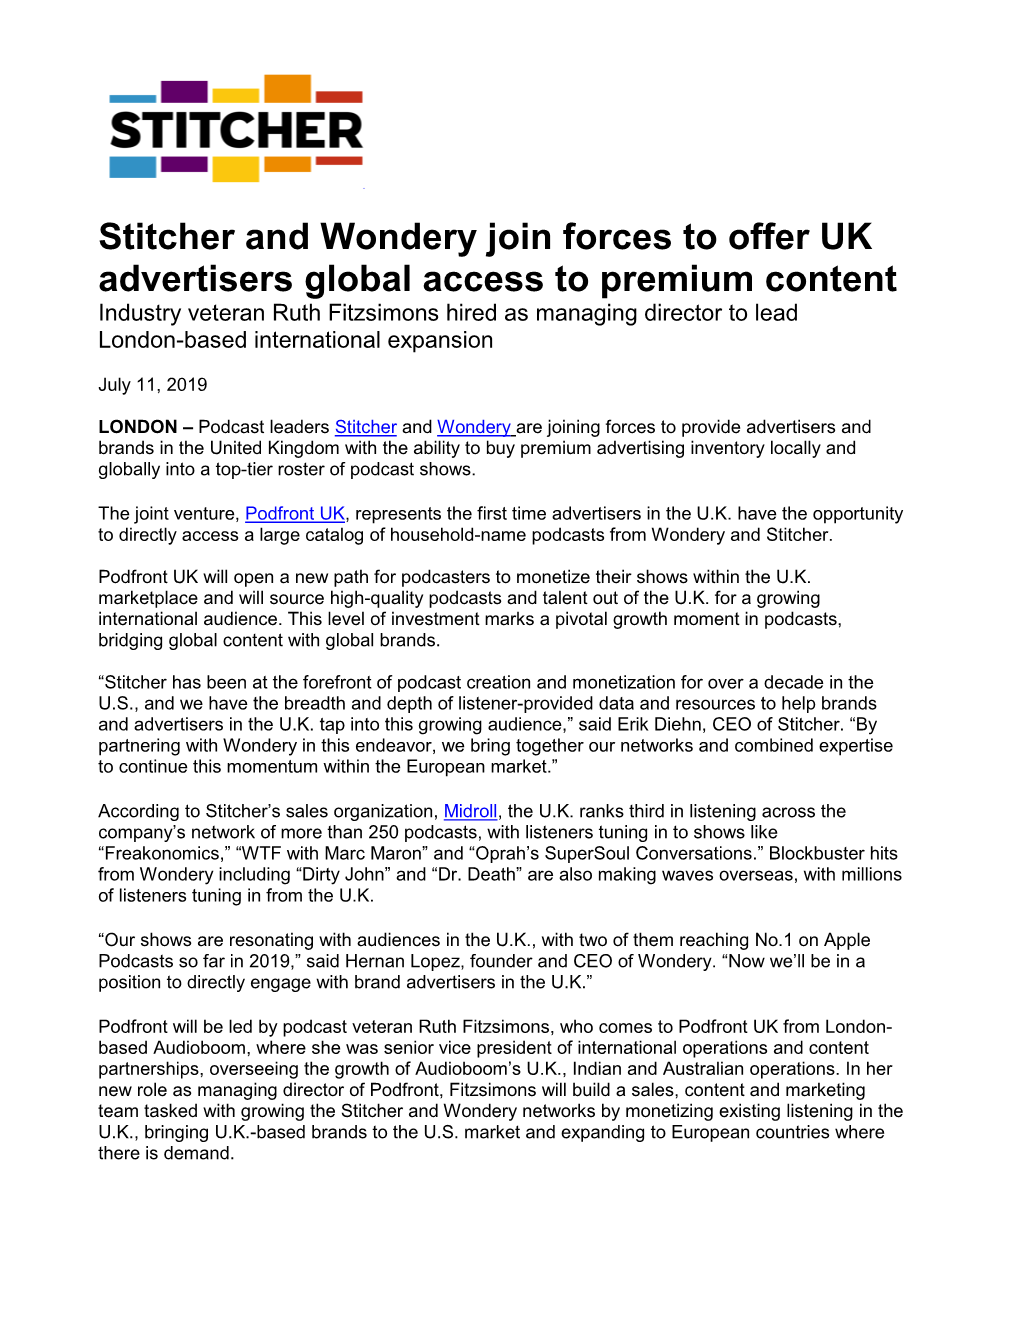 Stitcher and Wondery Join Forces to Offer UK Advertisers Global Access